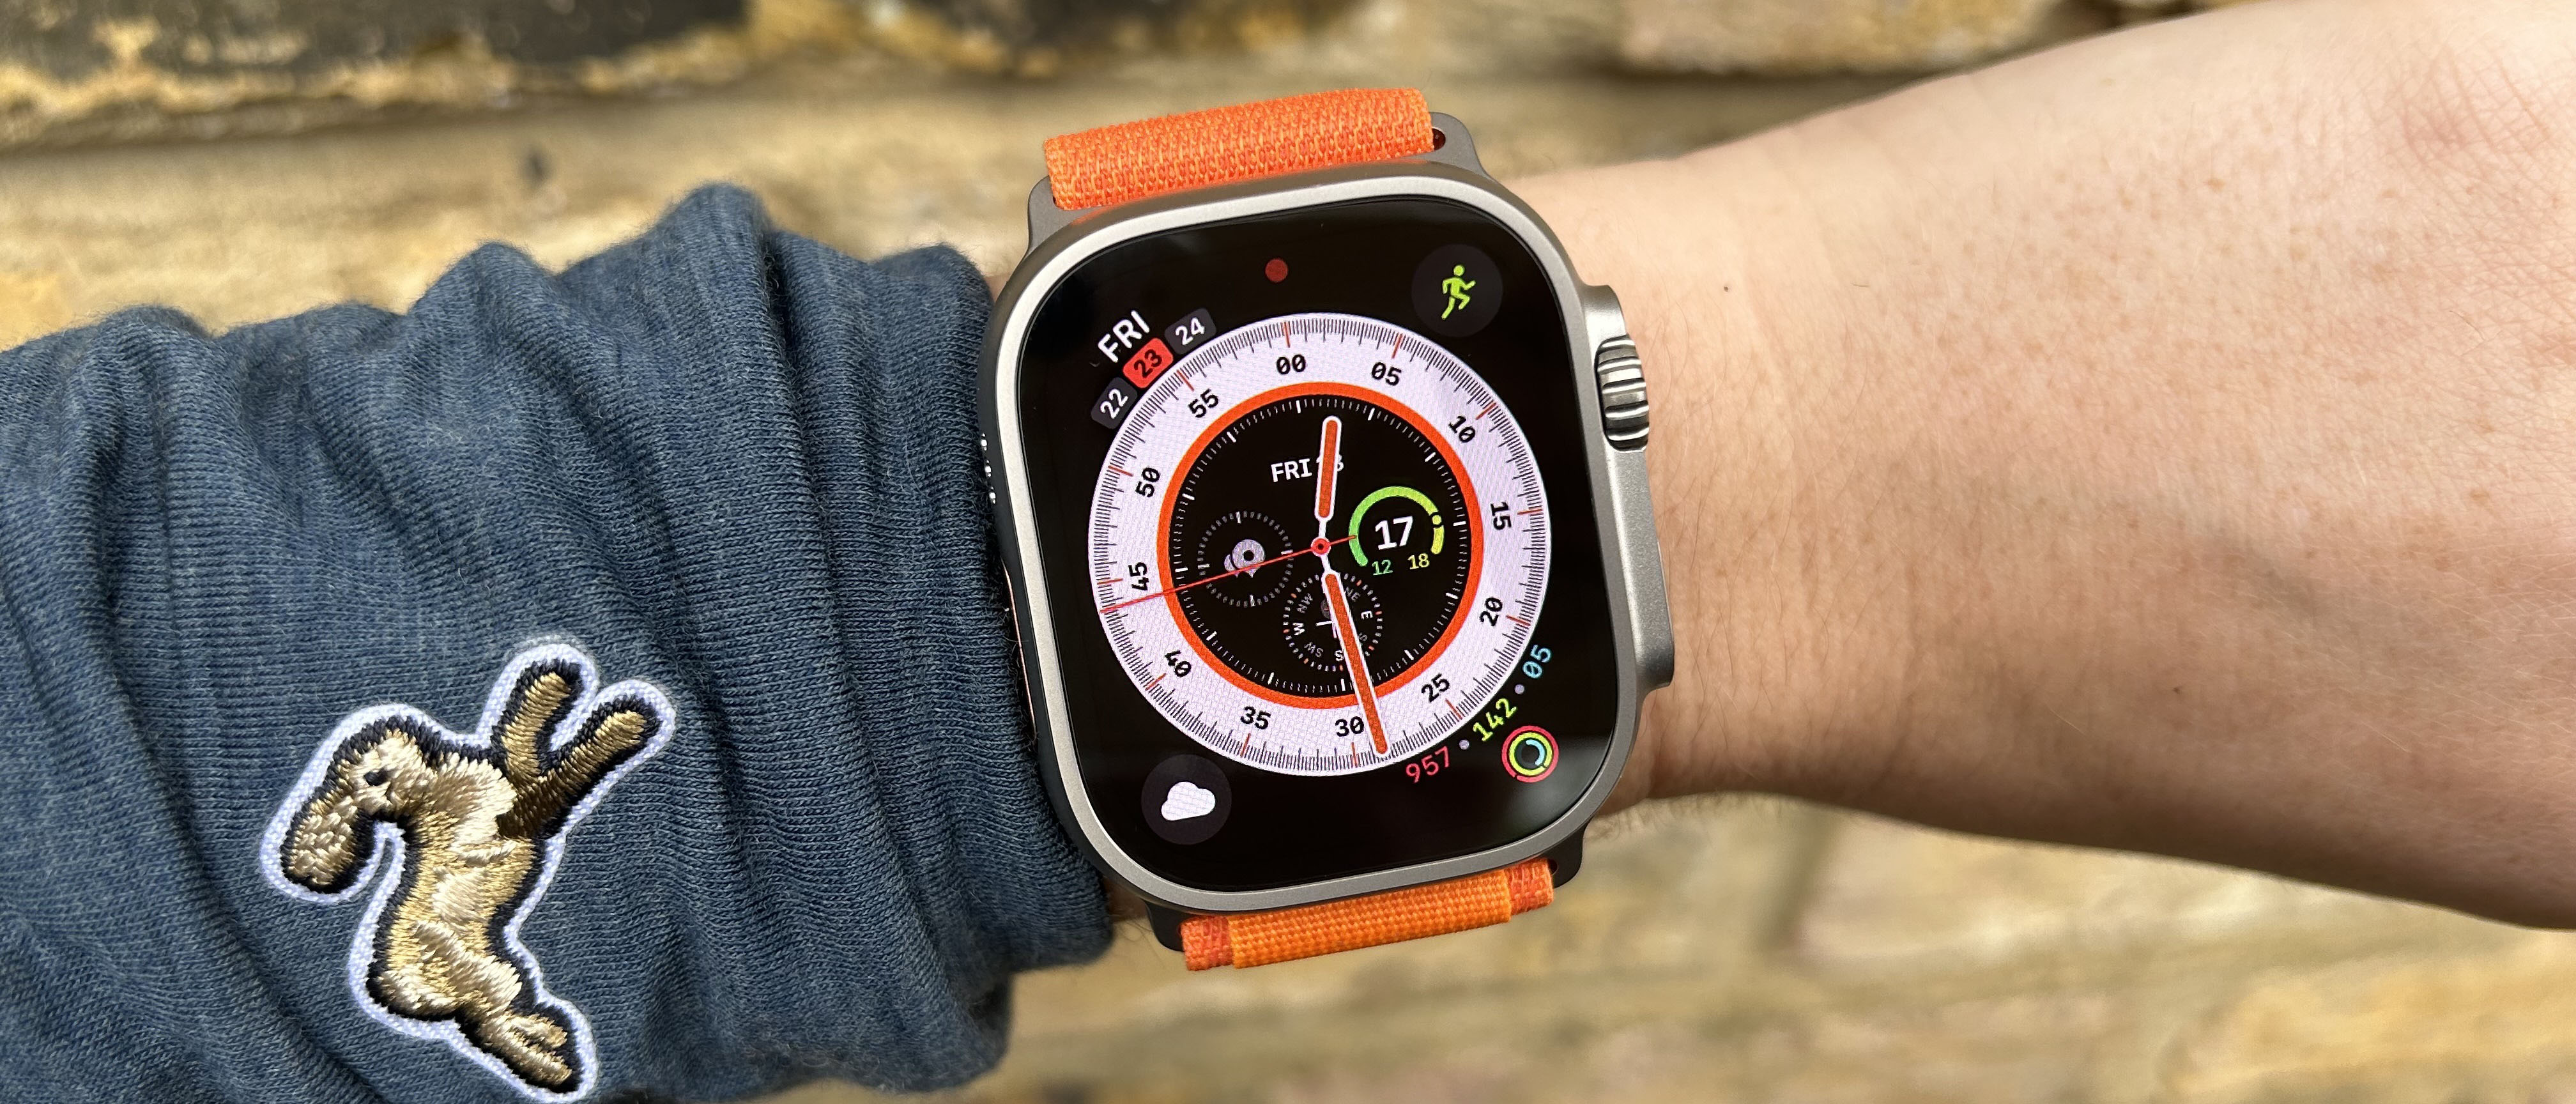 Apple Watch Ultra review | Tom's Guide